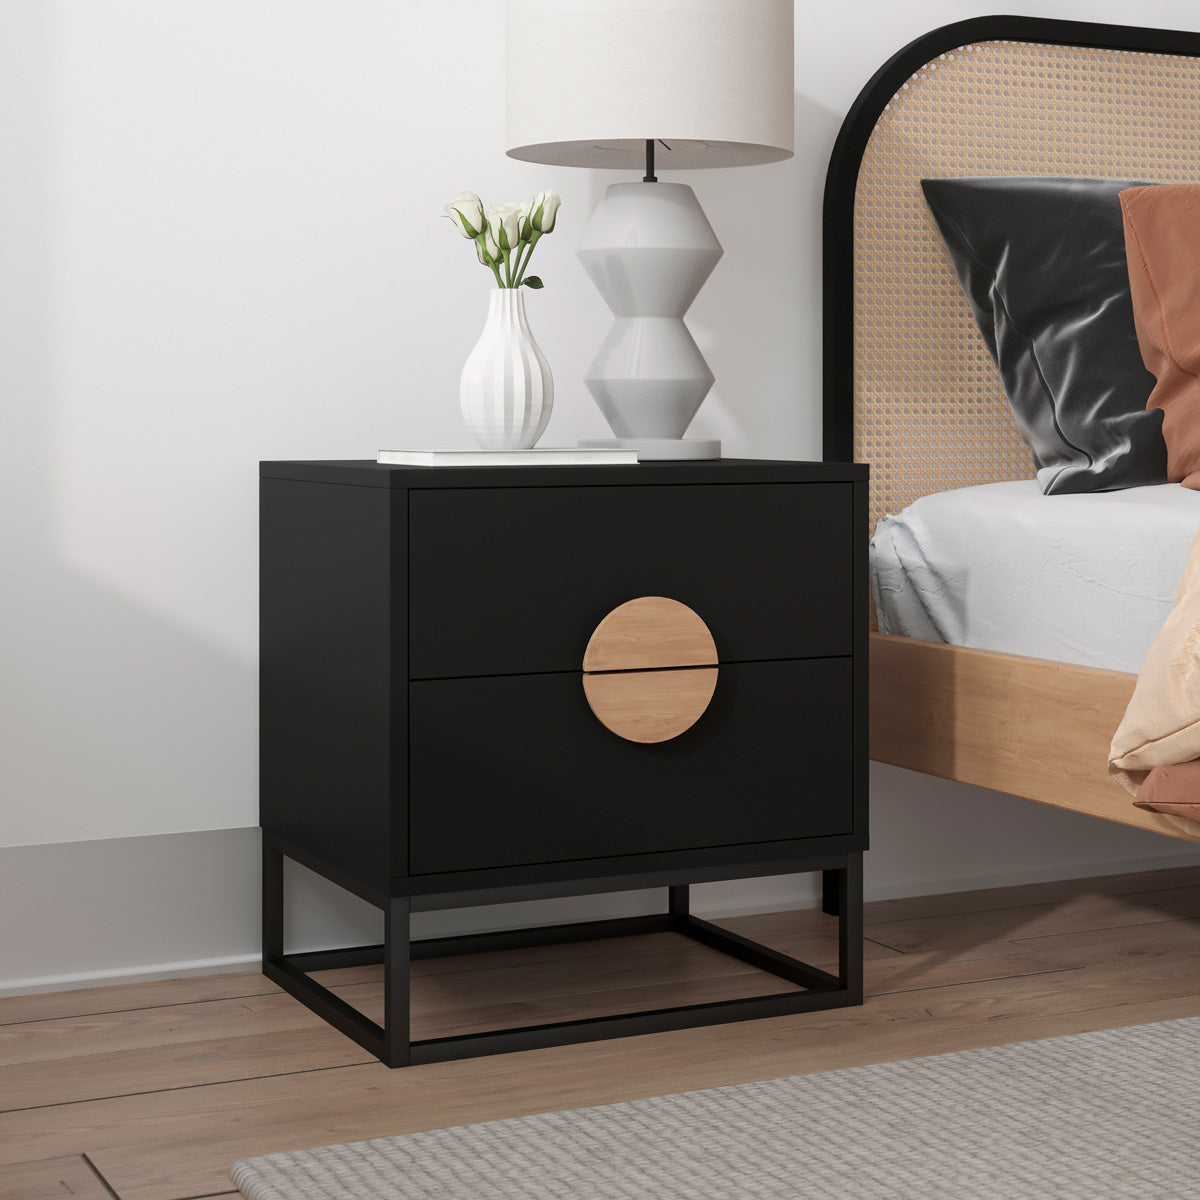 Black Wooden Bedside Table (Zodiac Collection)